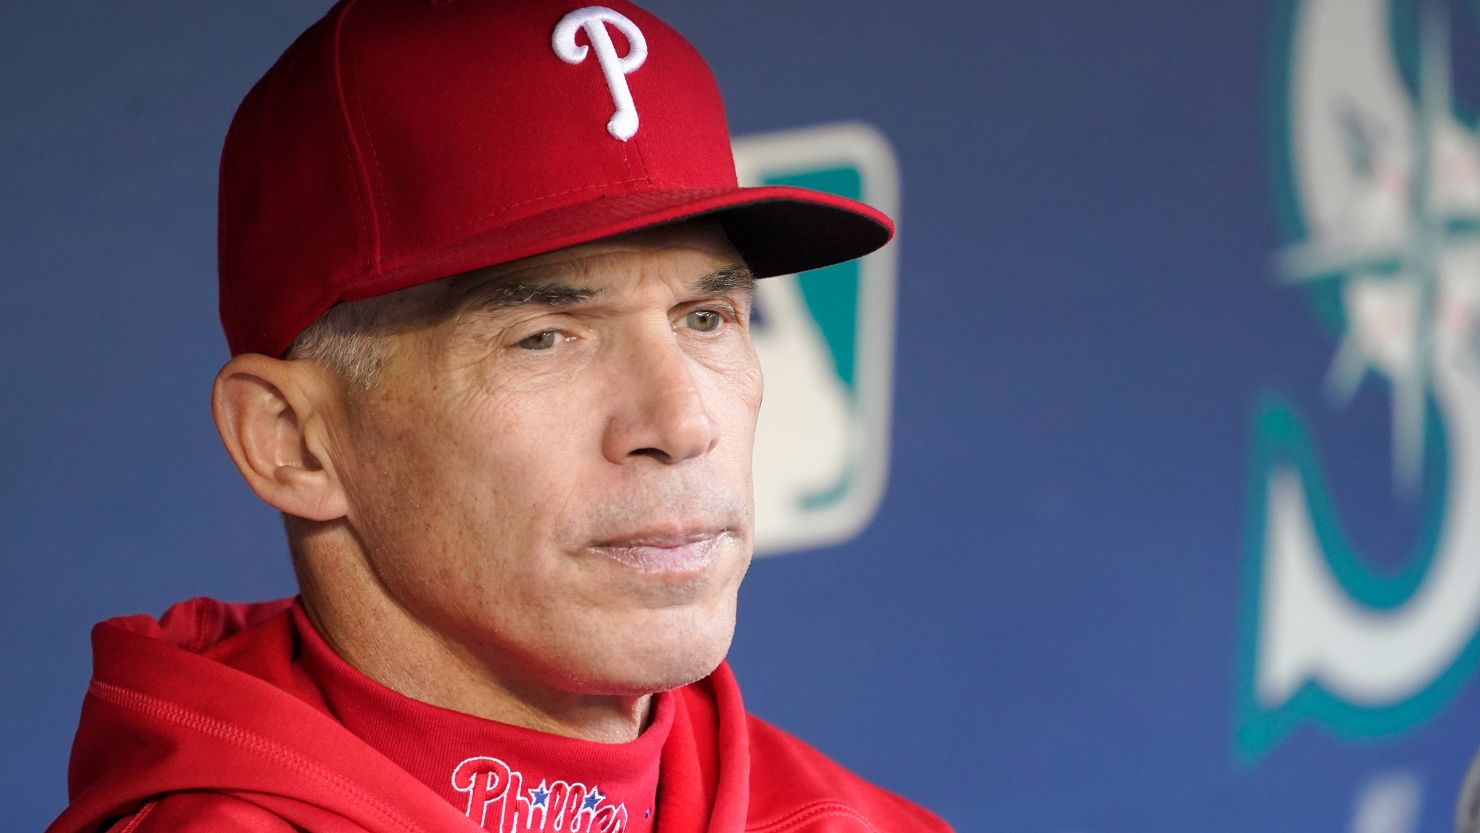 Philadelphia Phillies manager Joe Girardi was fired Friday. He was in his third season as the team's manager.